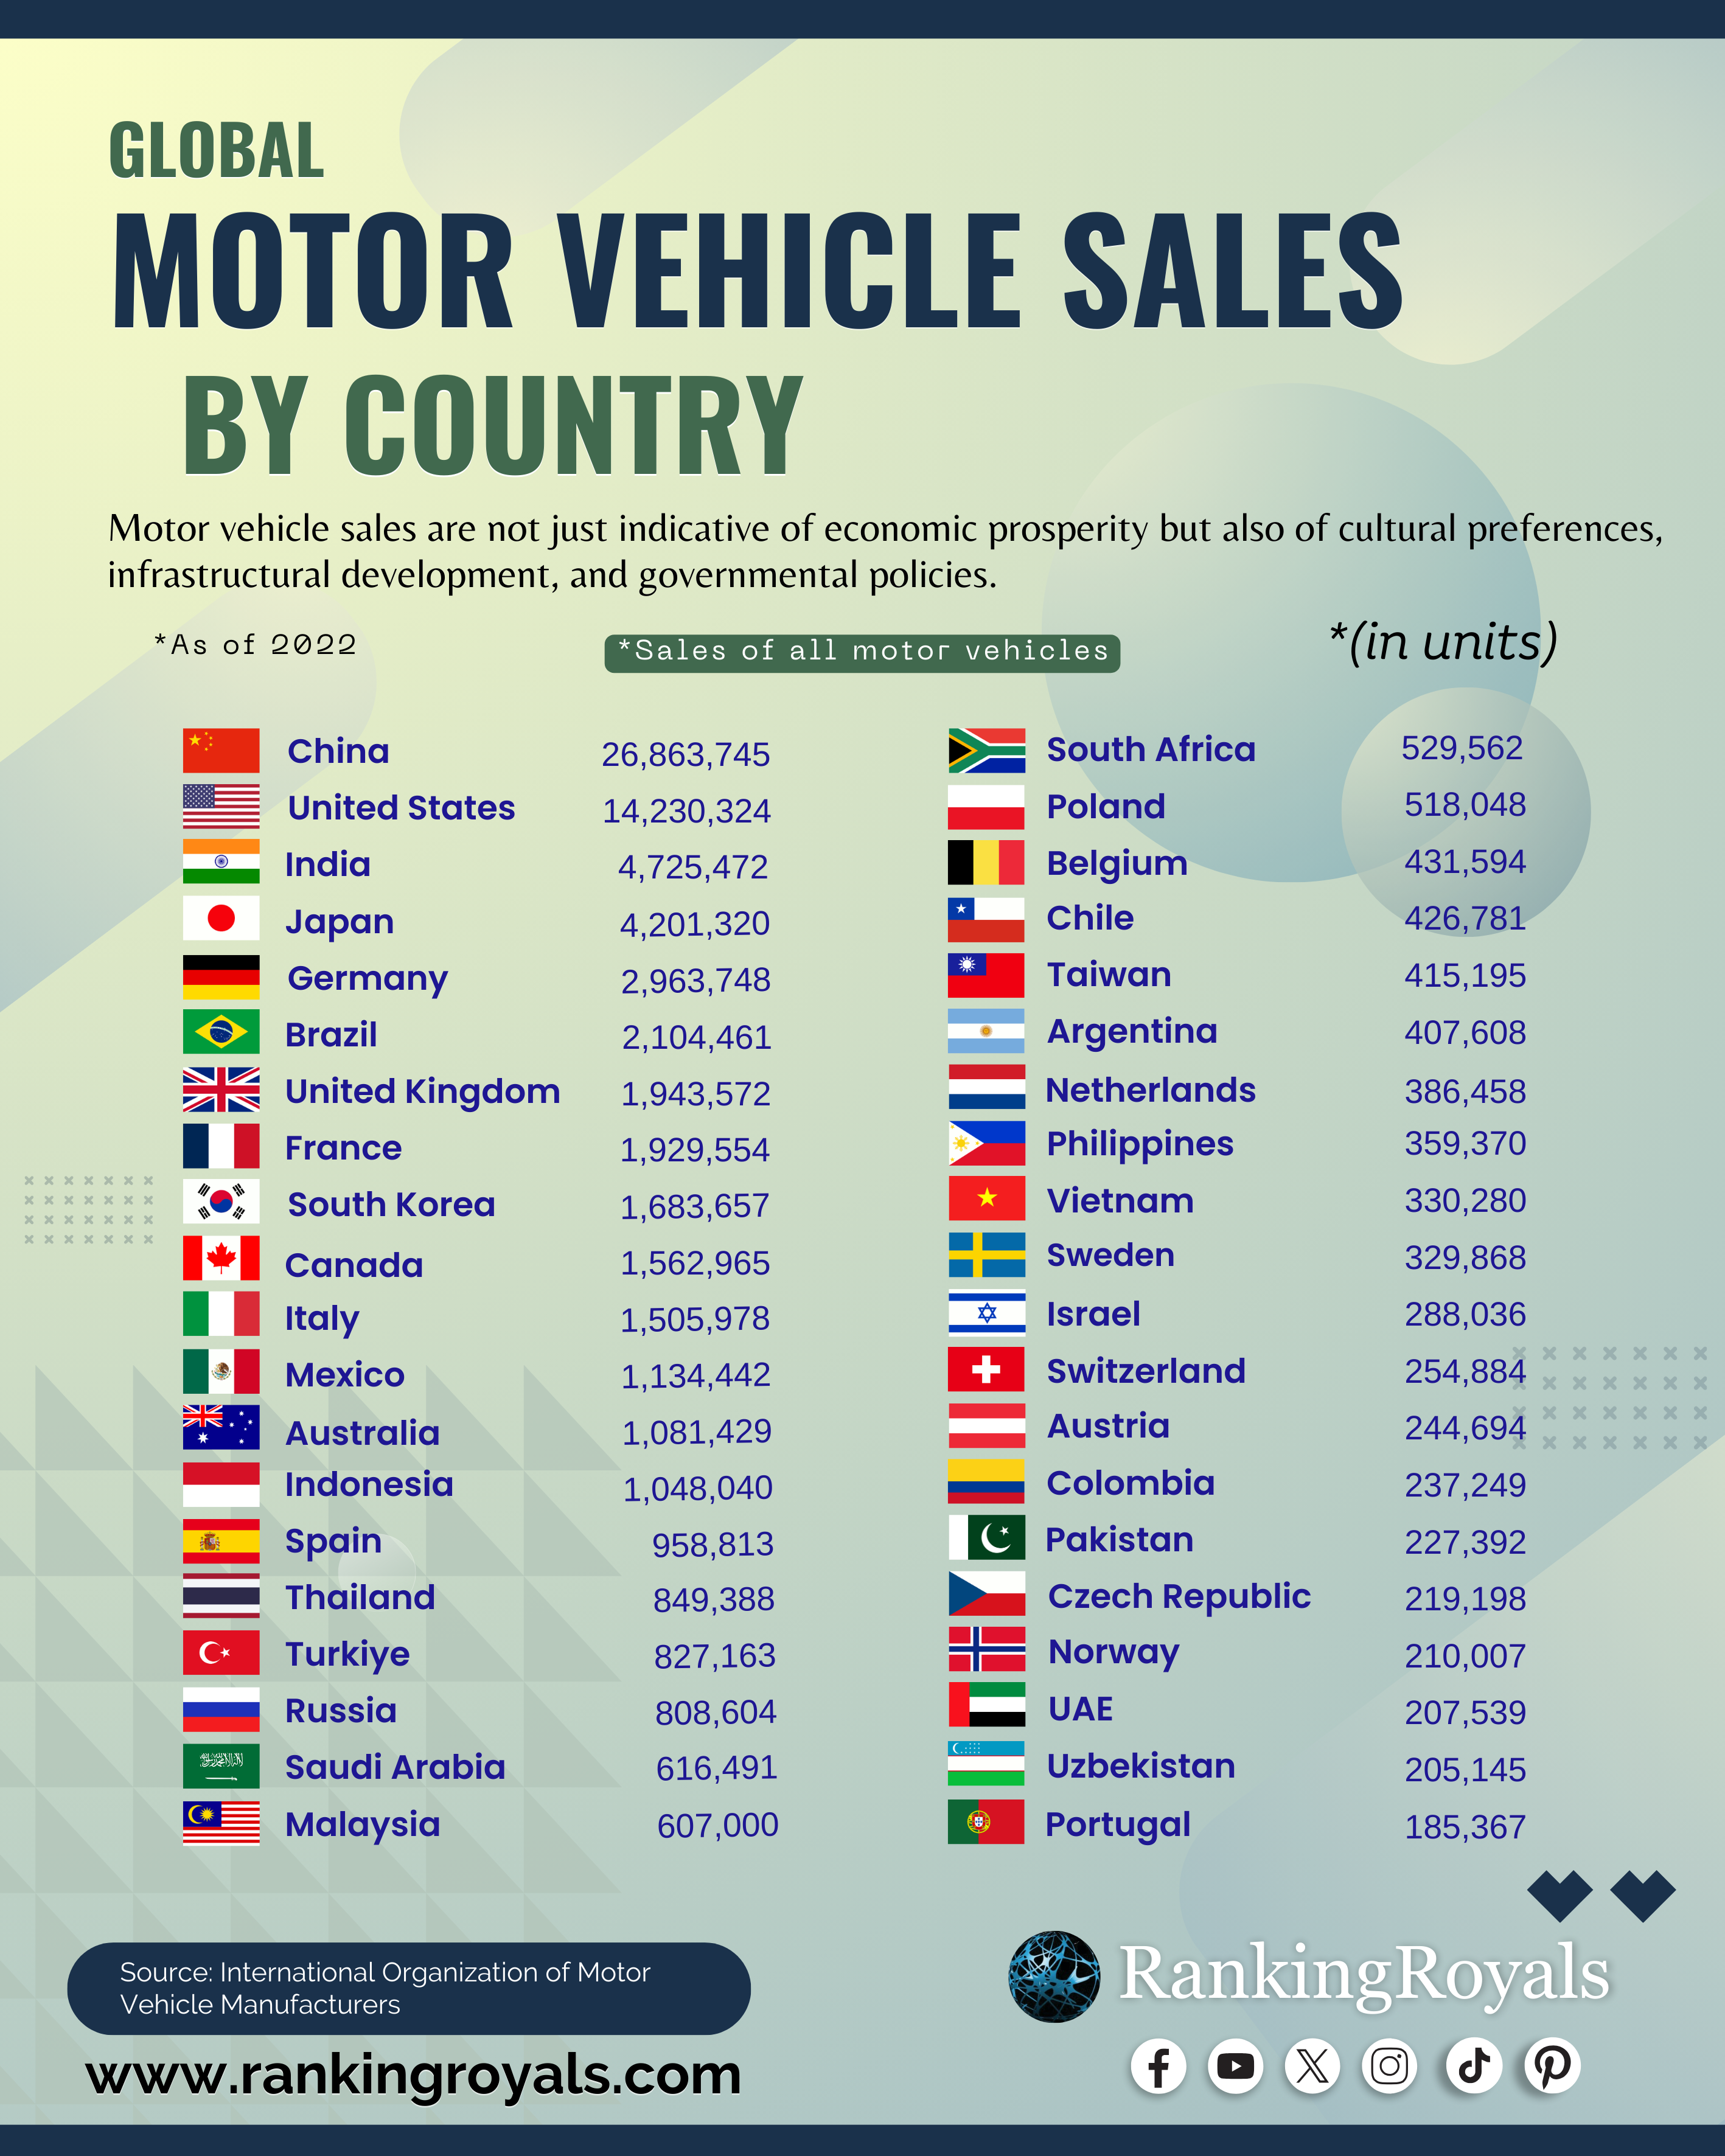 Global Motor Vehicle Sales by Country (2022).